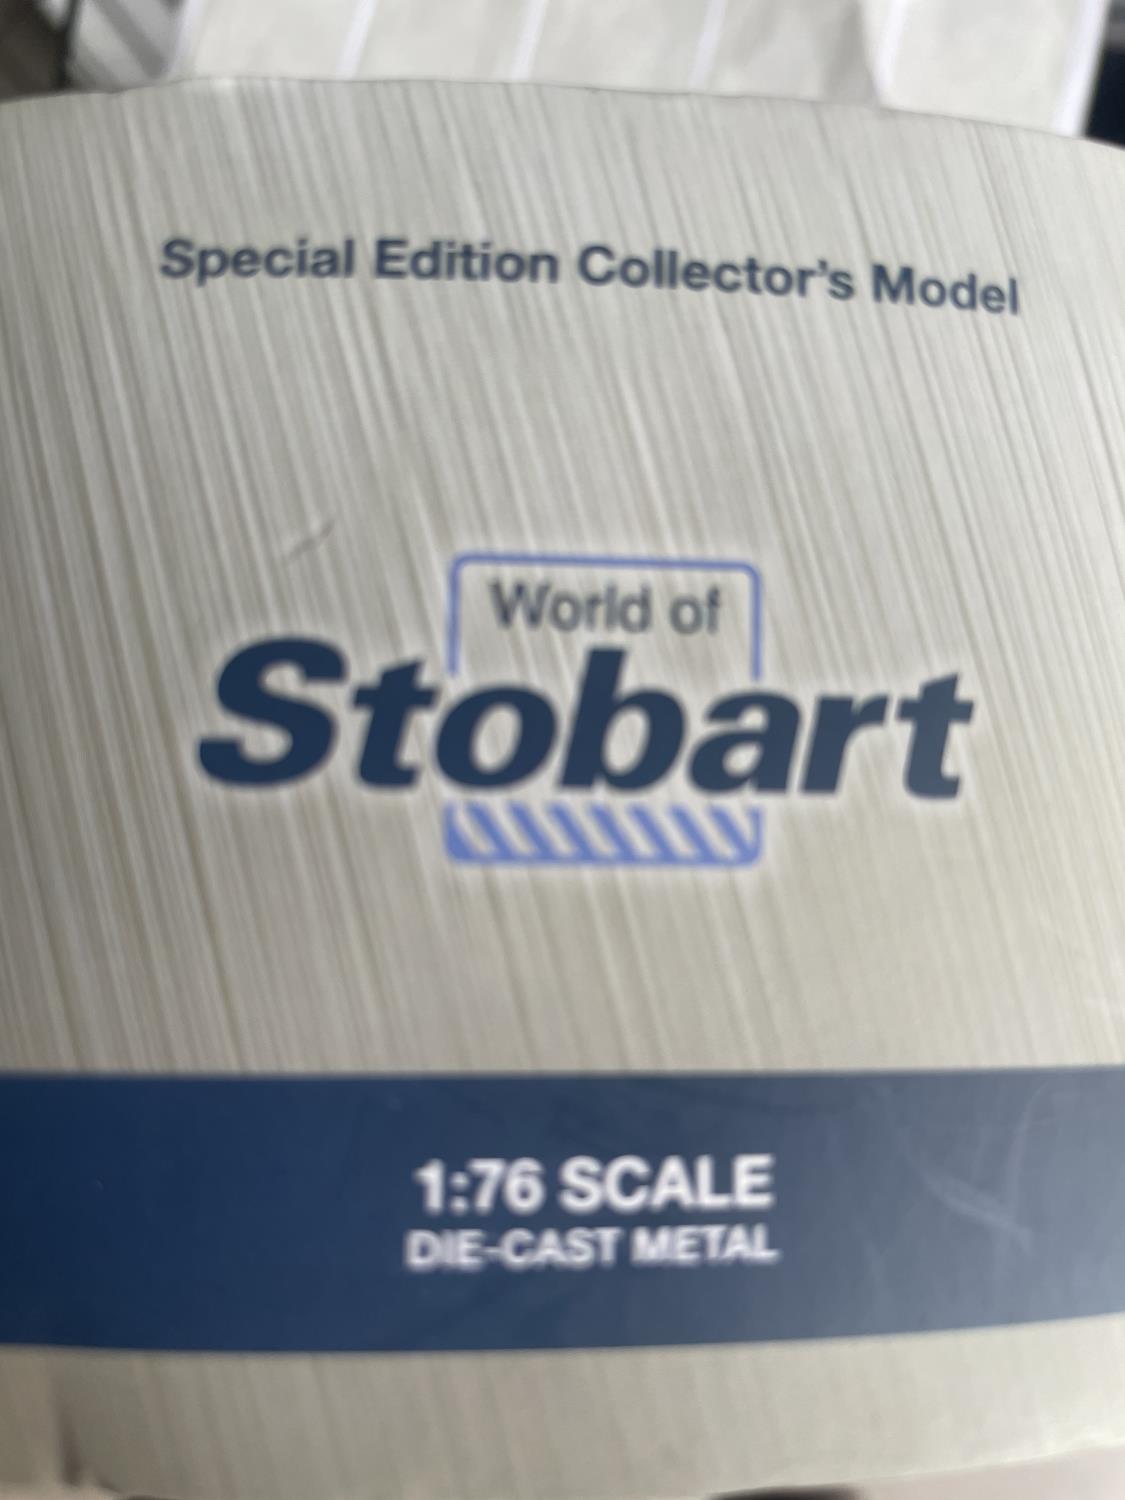 FIVE BOXED STOBART MODELS OF VARIOUS EXCAVATORS SOME THREE WITH COA - Image 8 of 8